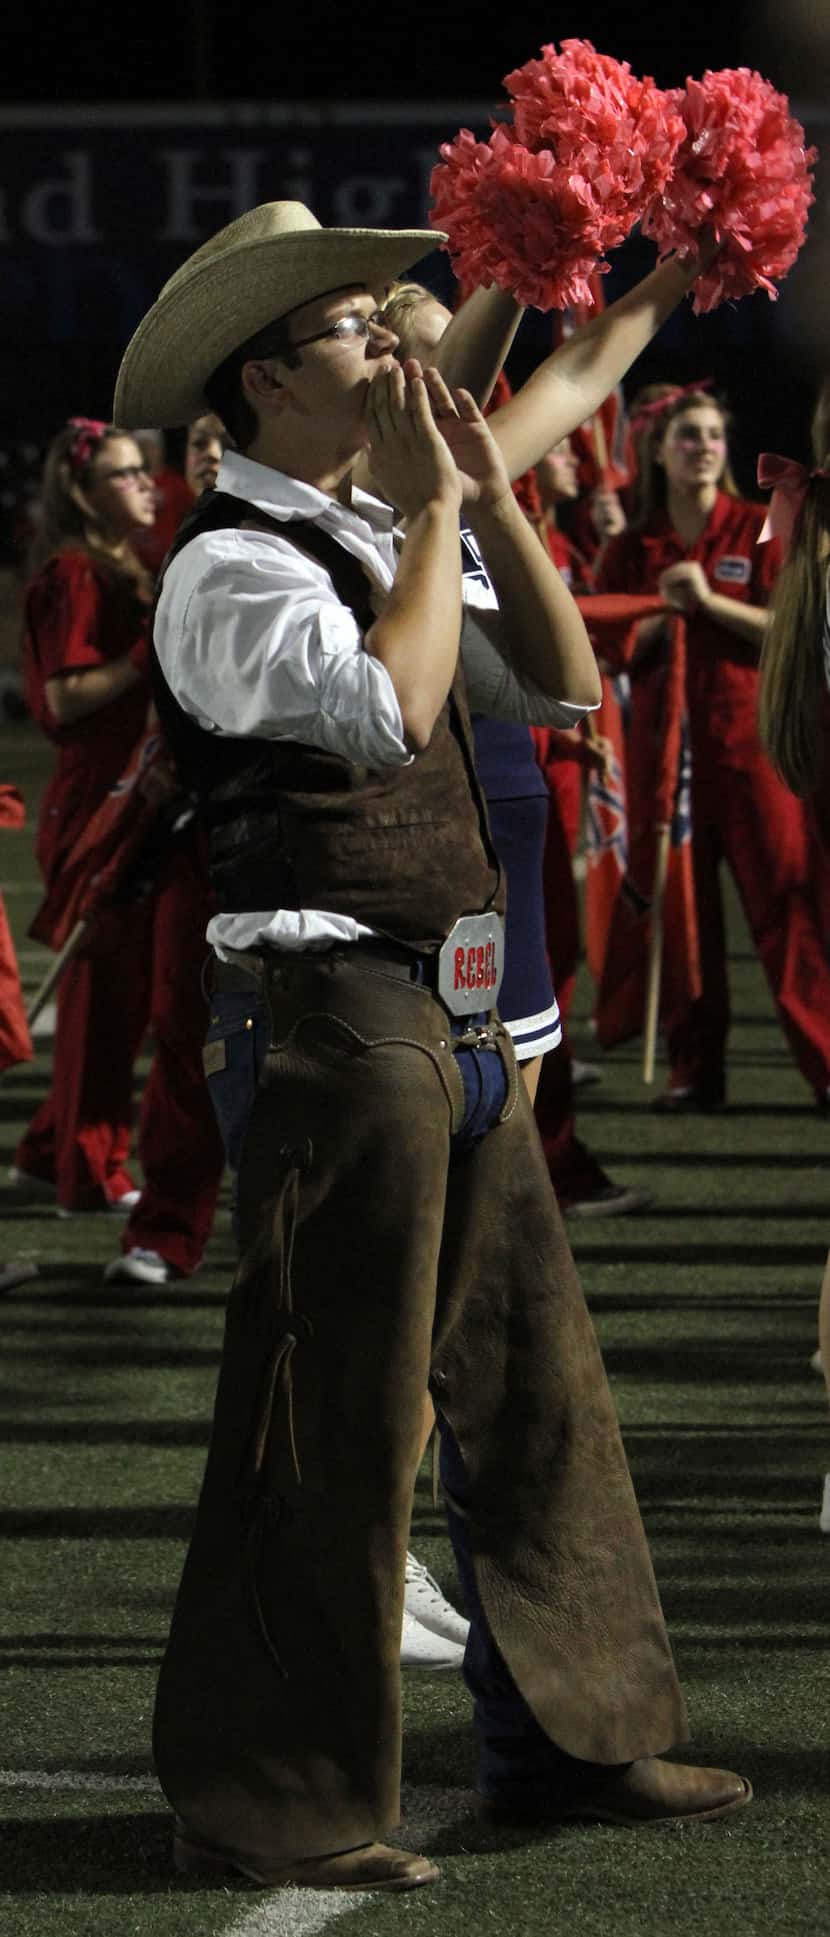 Blake Luczak, a junior at Richland High School, dressed as Rebel Man before a game at...